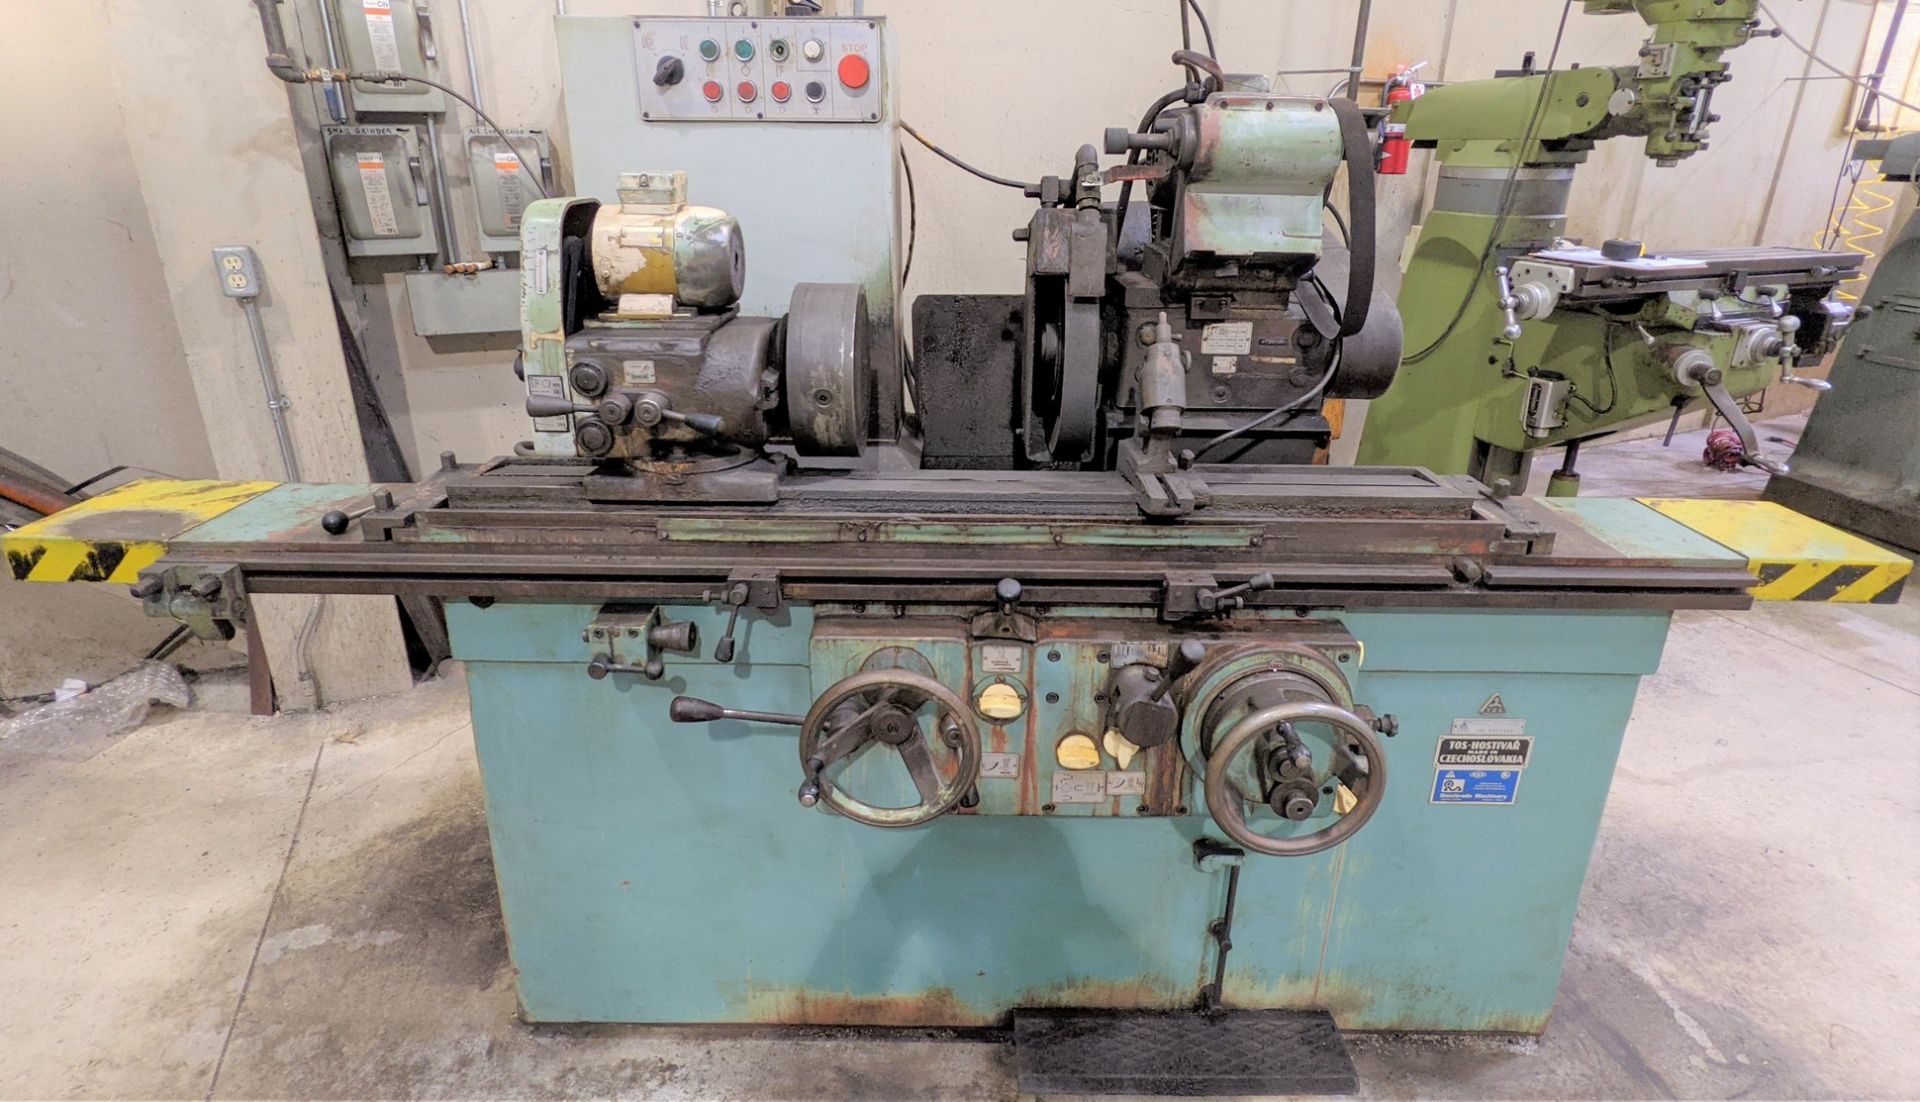 TOS 2UDP2750 CYLINDRICAL GRINDER, 10” MAGNETIC CHUCK, 15” WHEEL, 12” SWING, 54” BED, SPEEDS TO 1,950 - Image 3 of 15